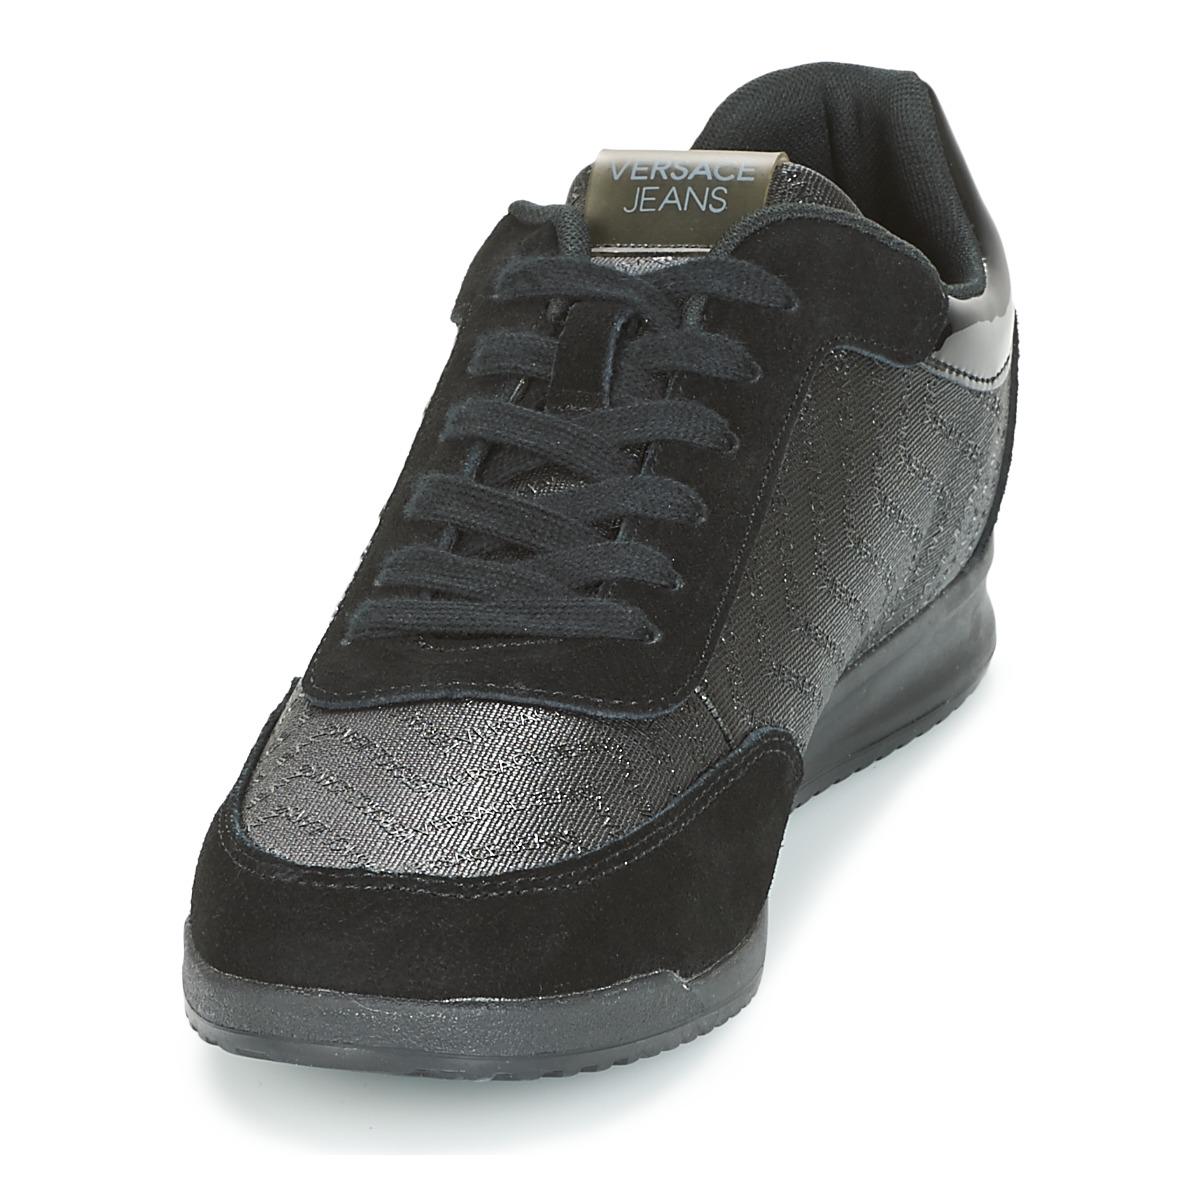 versace jeans mens trainers